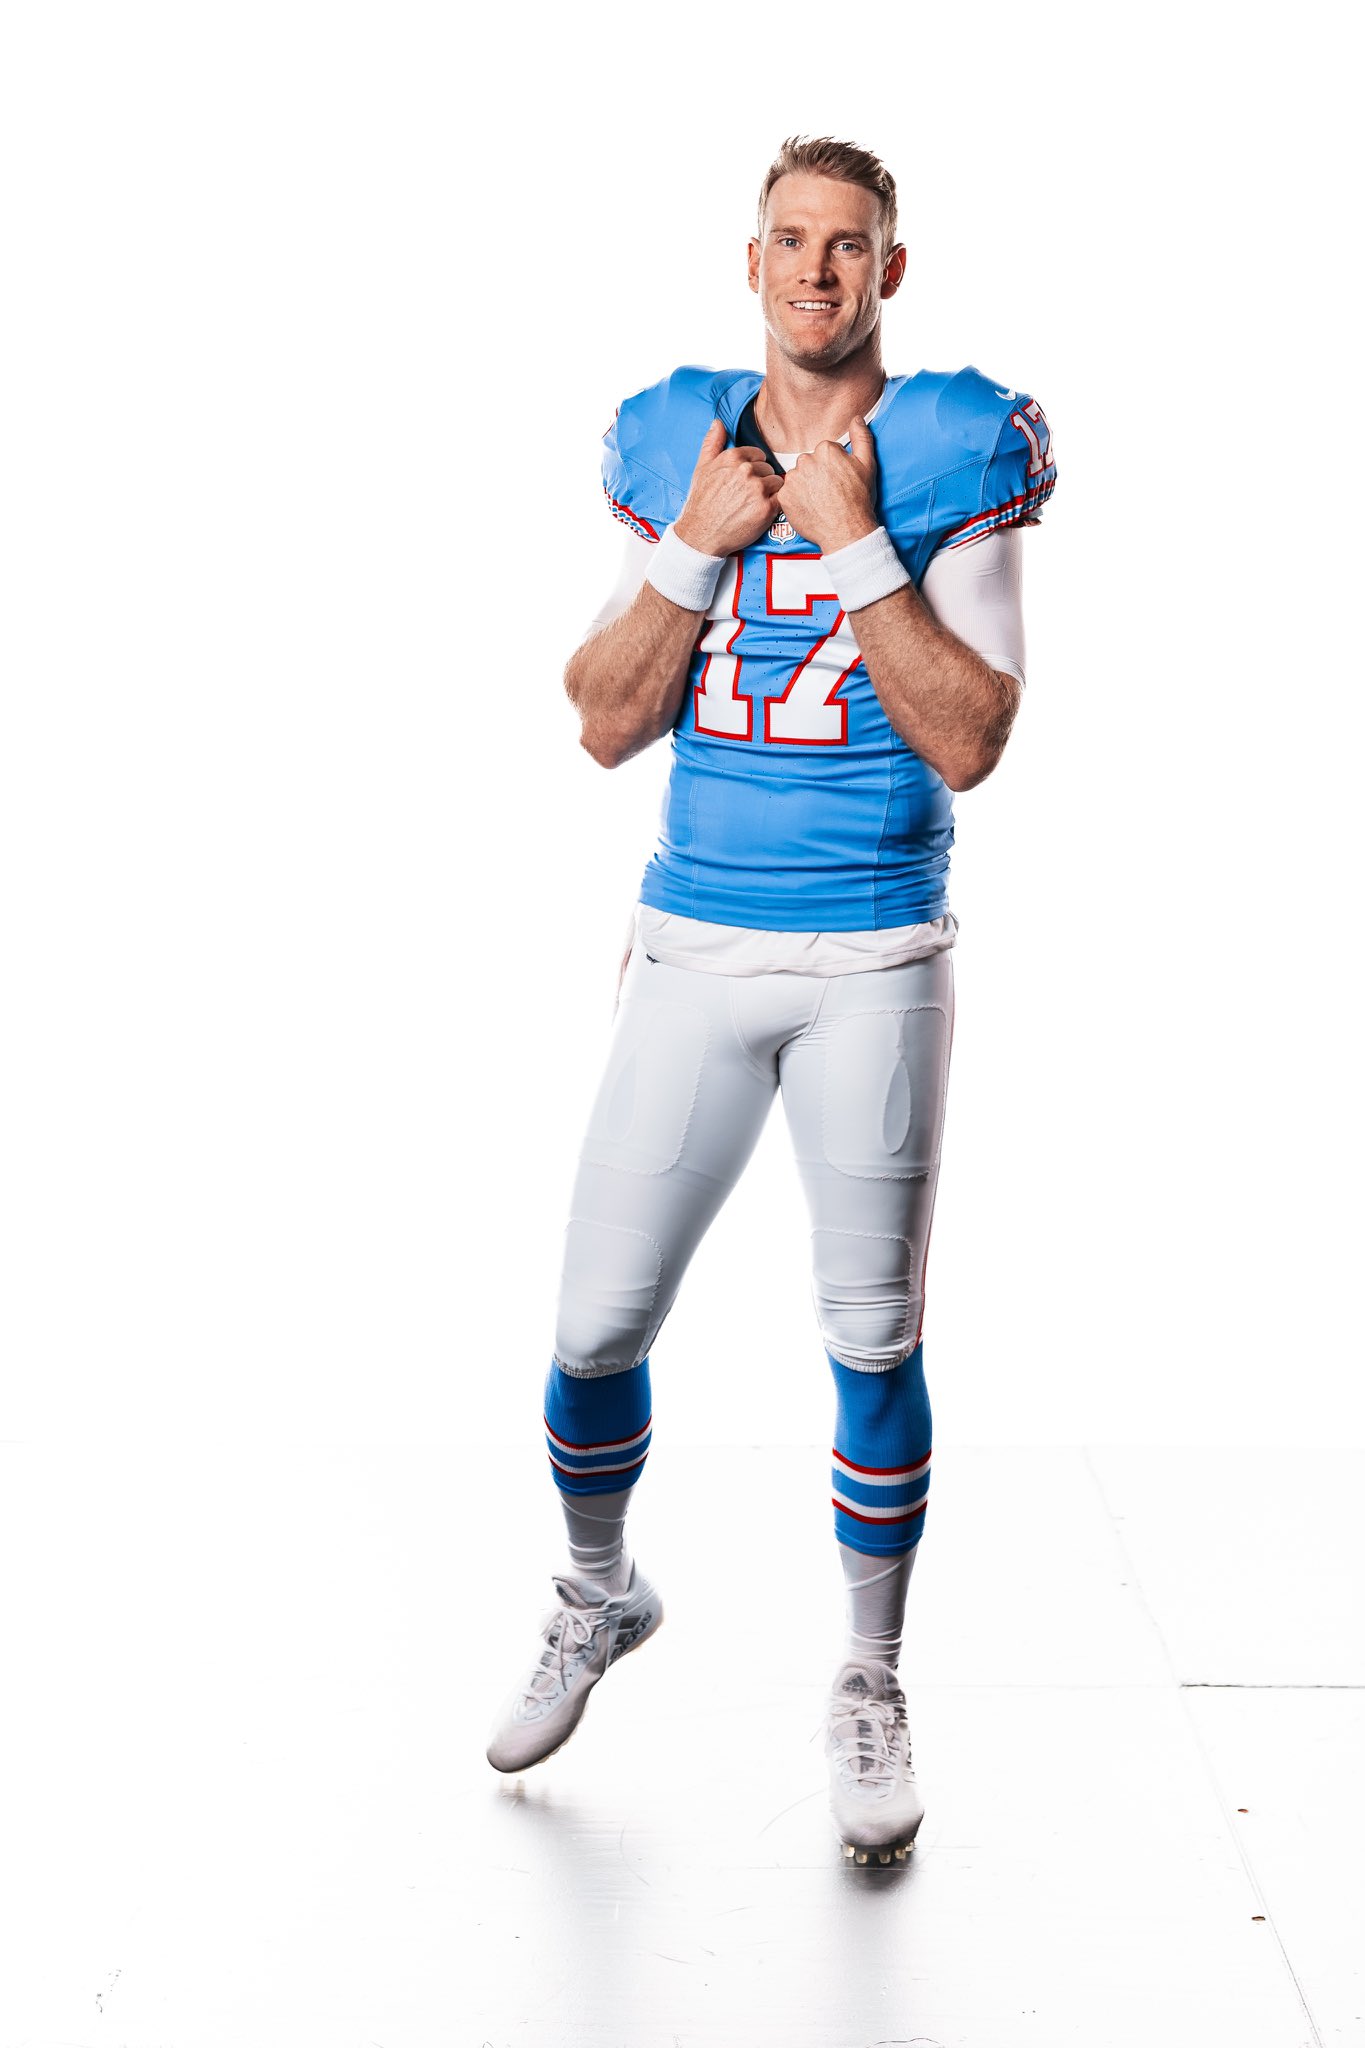 The @titans are bringing back the Oiler blue uniforms this season. 👀